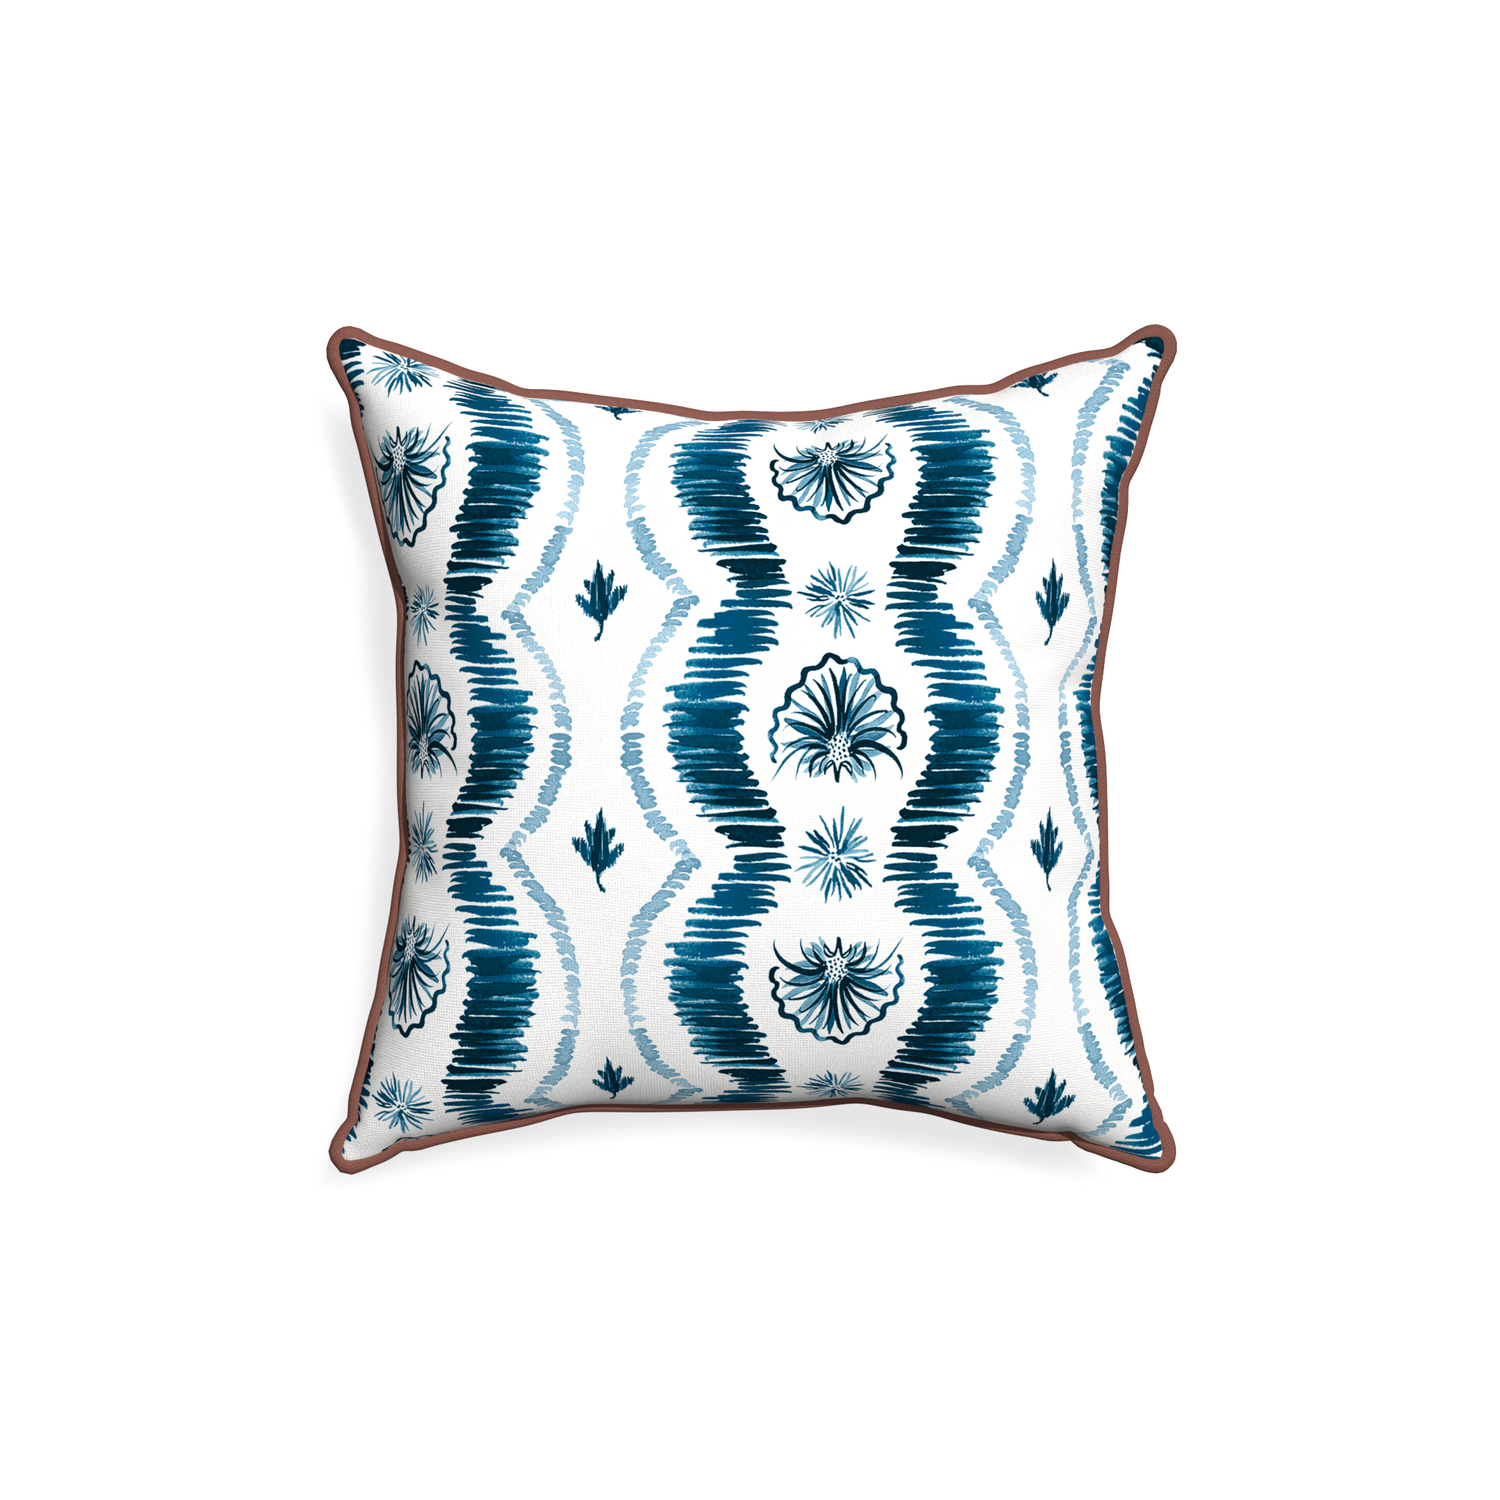 18-square alice custom blue ikatpillow with w piping on white background